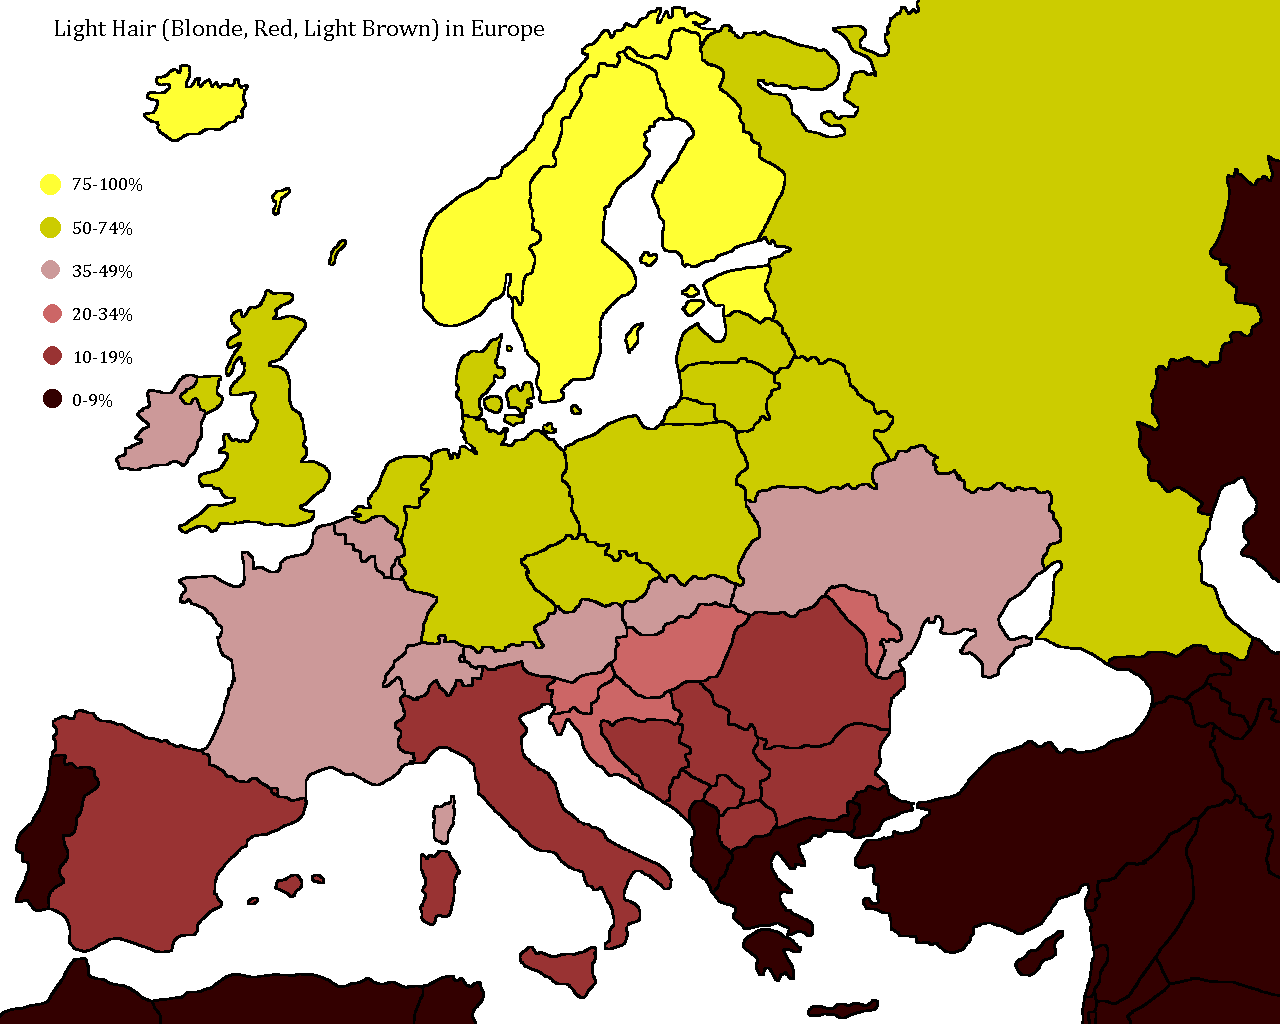 Light Hair (Blonde, Red, Light Brown) in Europe. - Maps on the Web